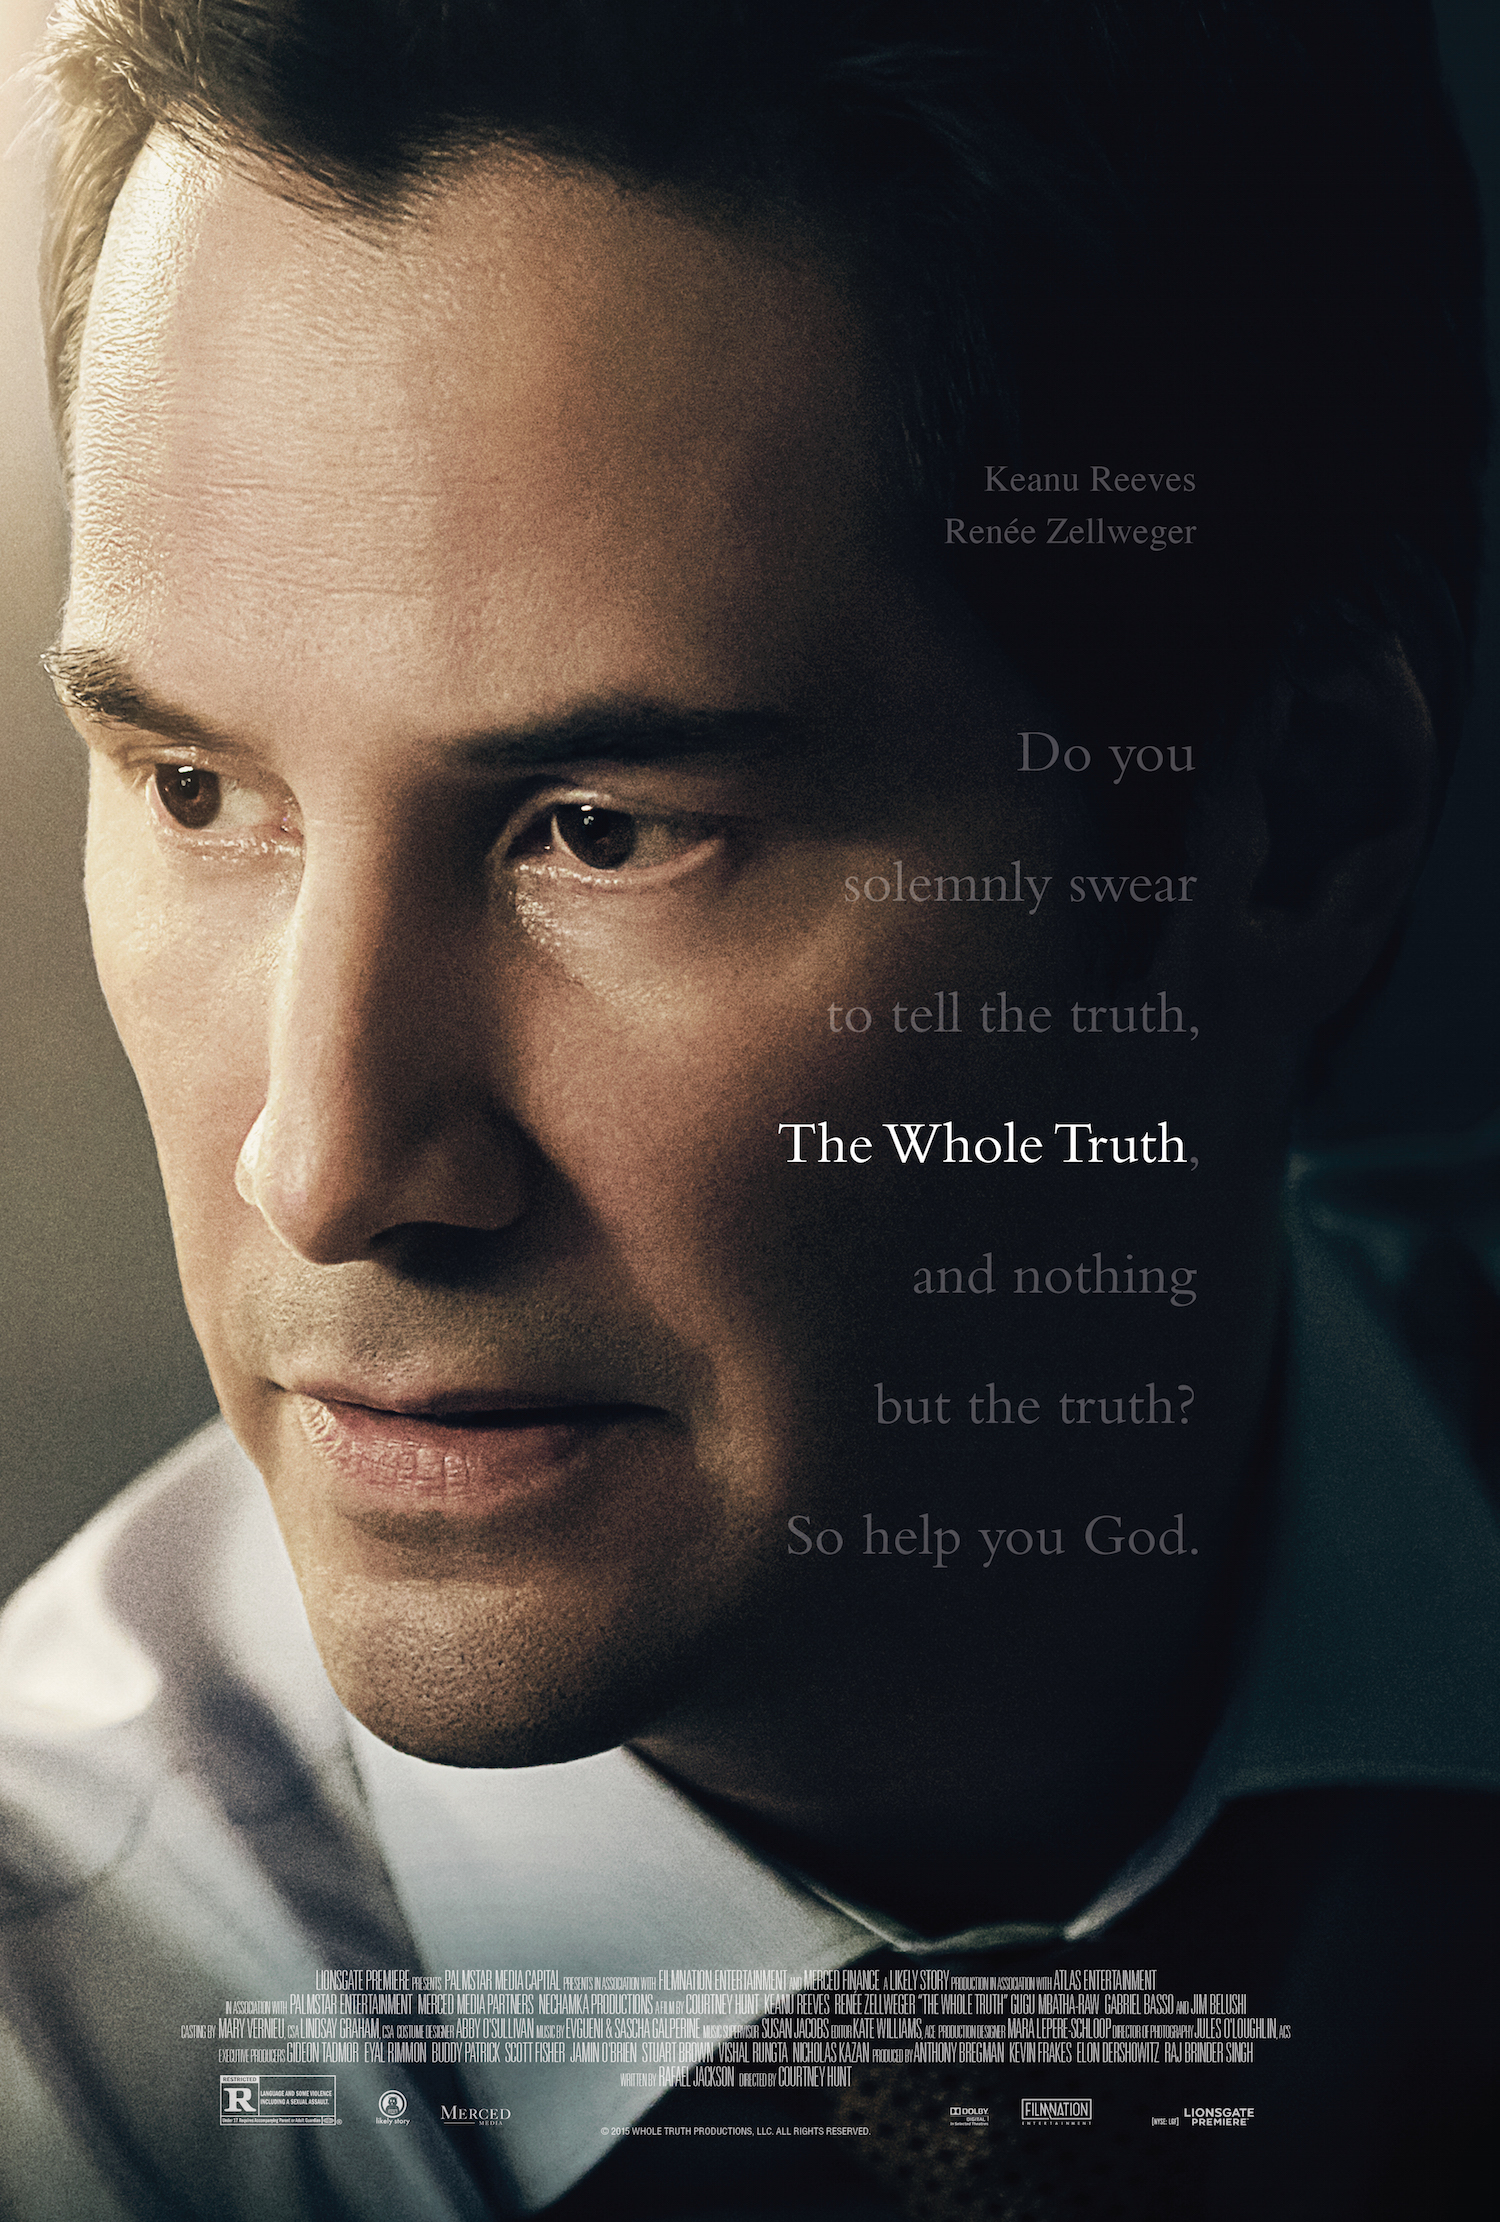 The Whole Truth (2016) Keanu Reeves